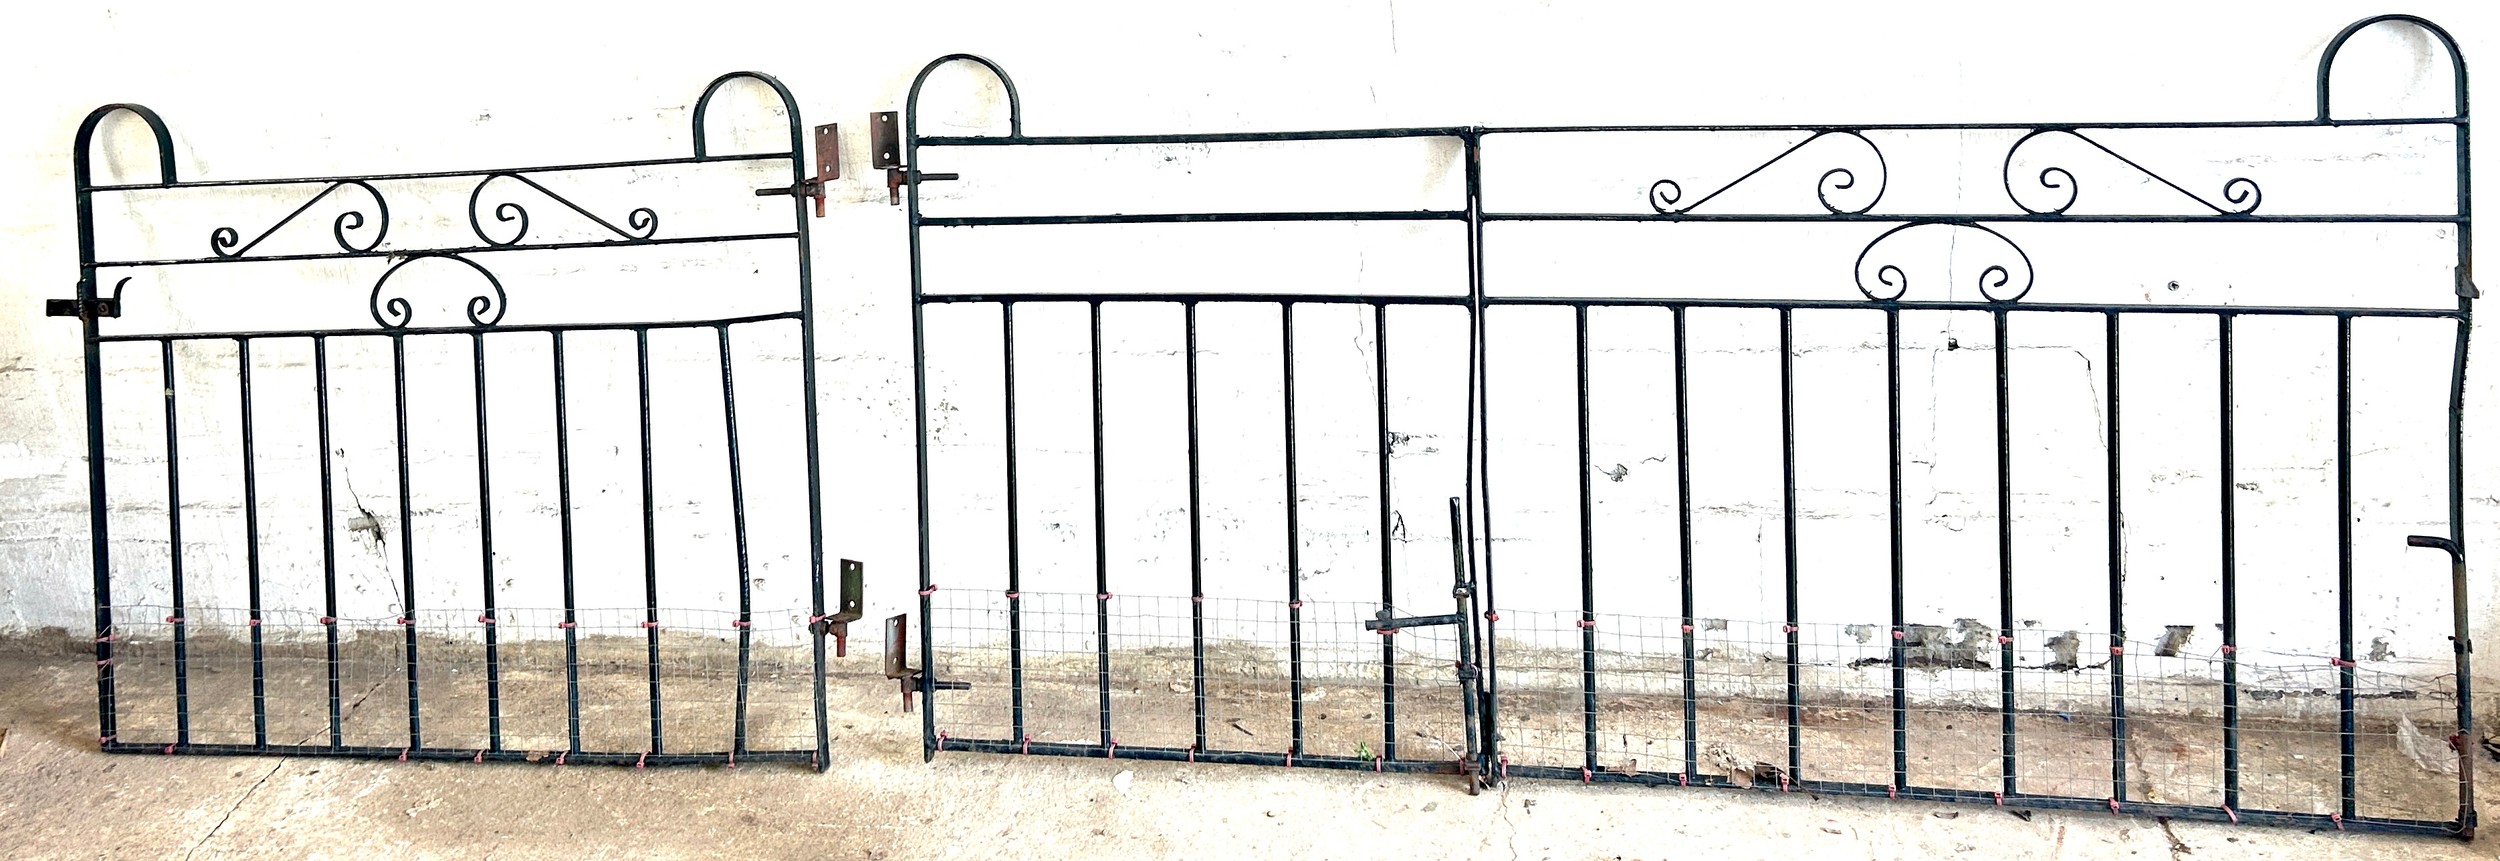 Pair matching gates, largrest measures Width 74 inches, Height 37 inches, overall length of gates